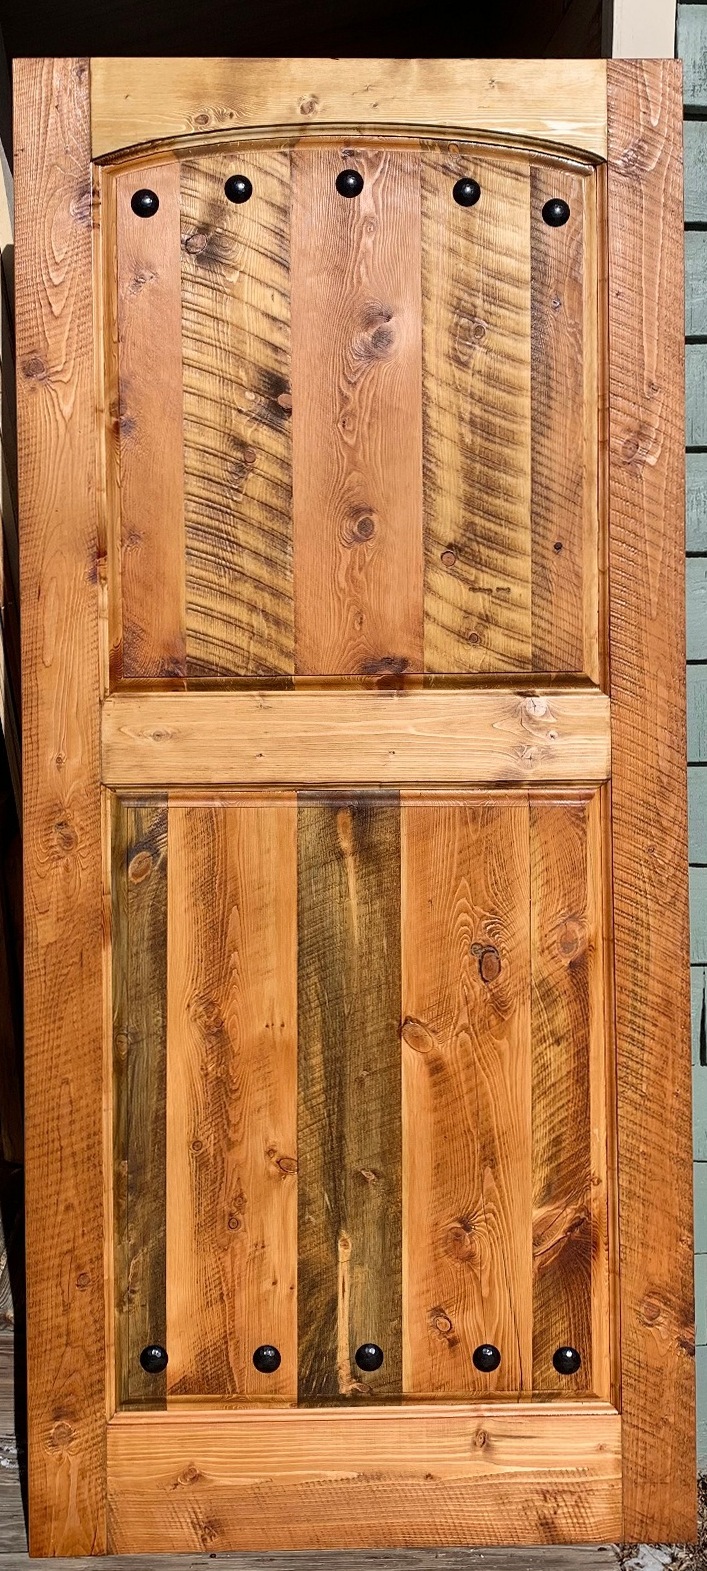 Sante Fe style door with red fir and golden pine